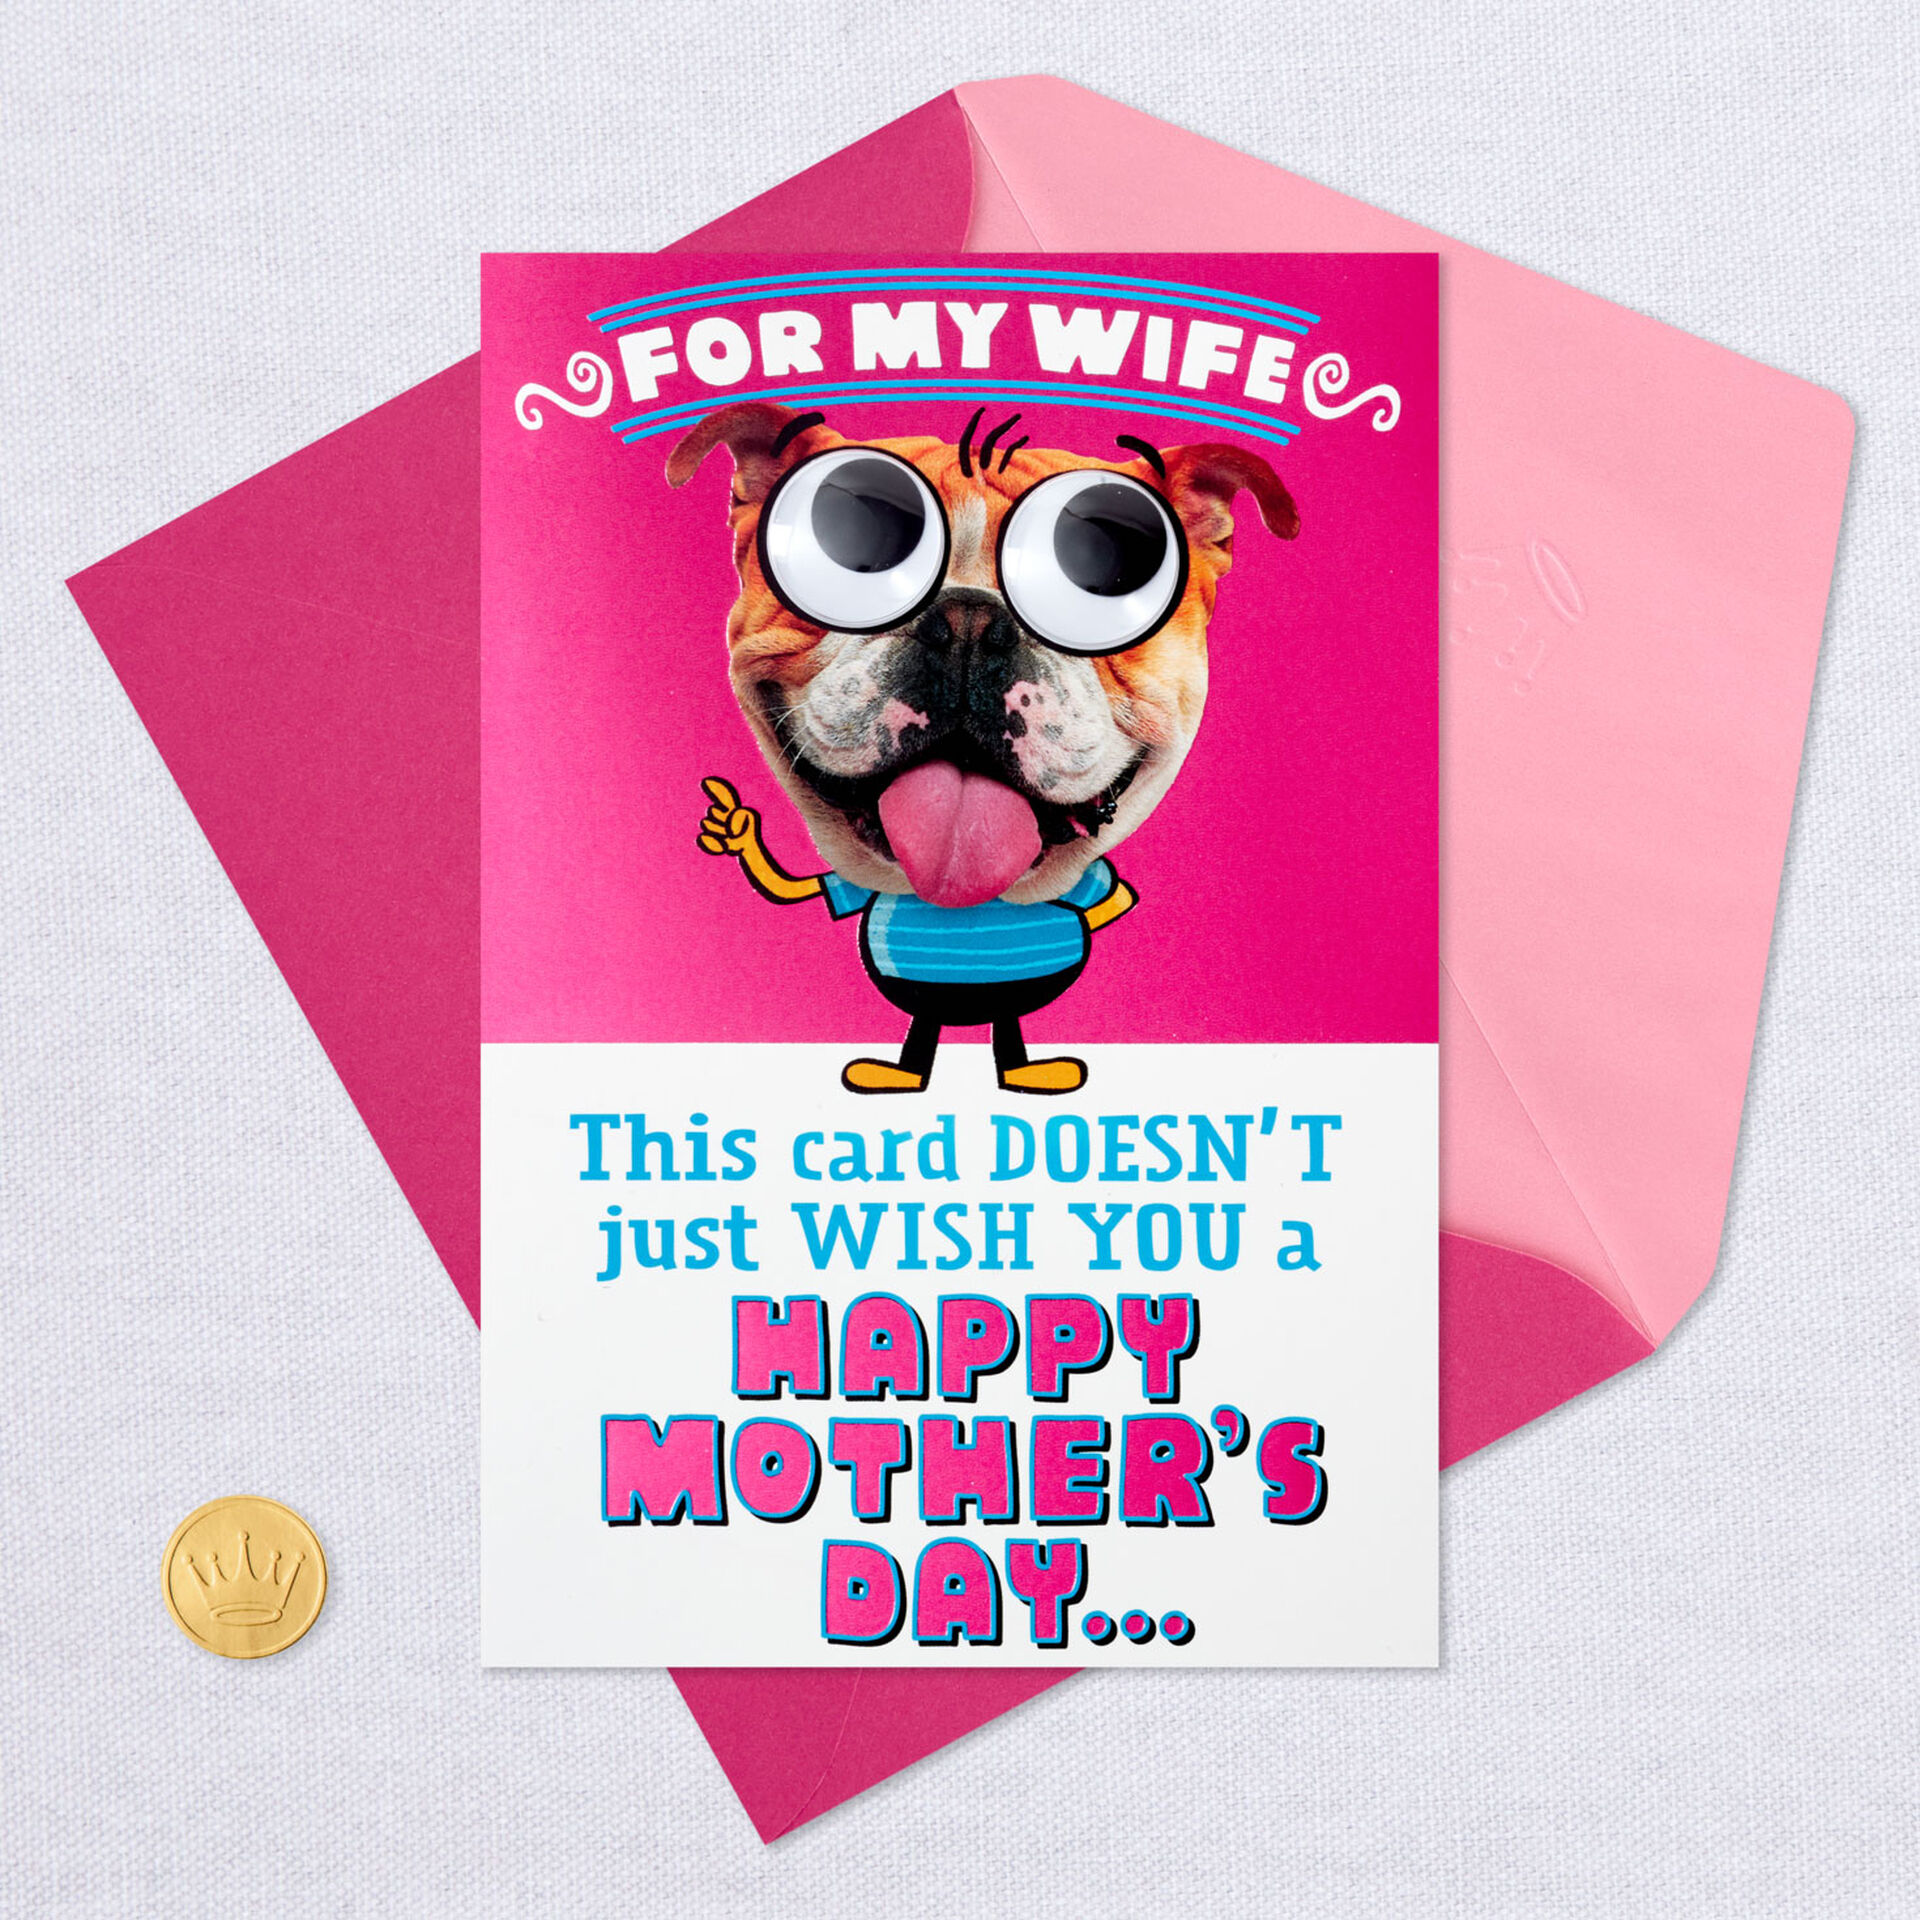 Details about  / Funny Happy Mother/'s Day Hot Wife Google Eyed Puppy Dog Hallmark Greeting Card